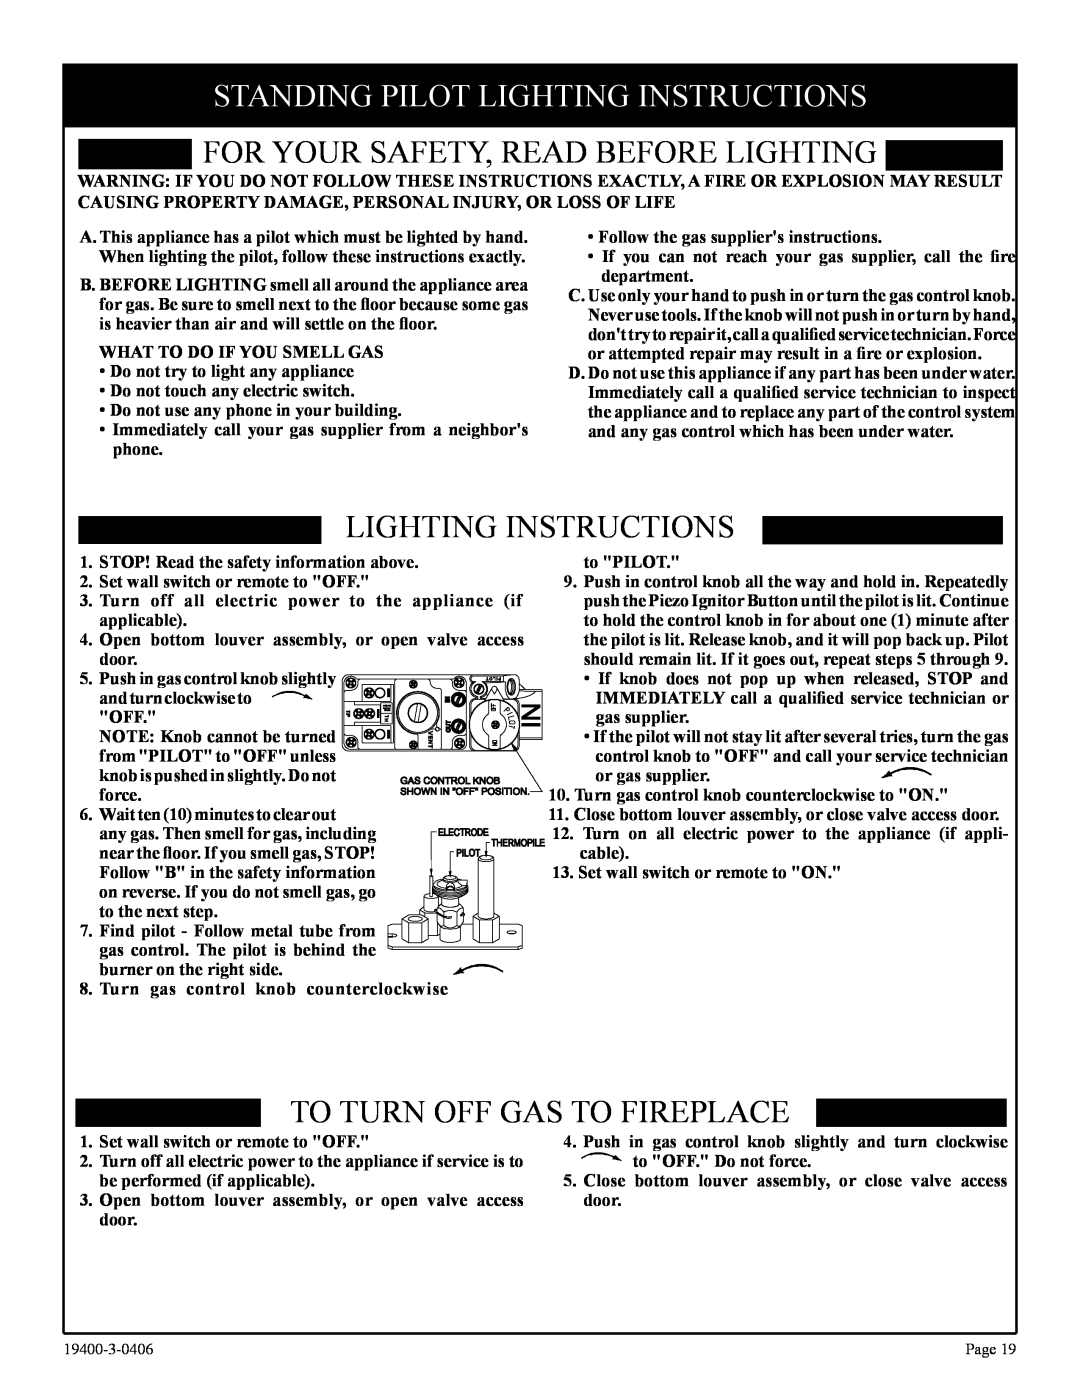 Vulcan-Hart BVD34FP50(F,L)N-1 Standing Pilot Lighting Instructions, For Your Safety, Read Before Lighting, to PILOT, door 